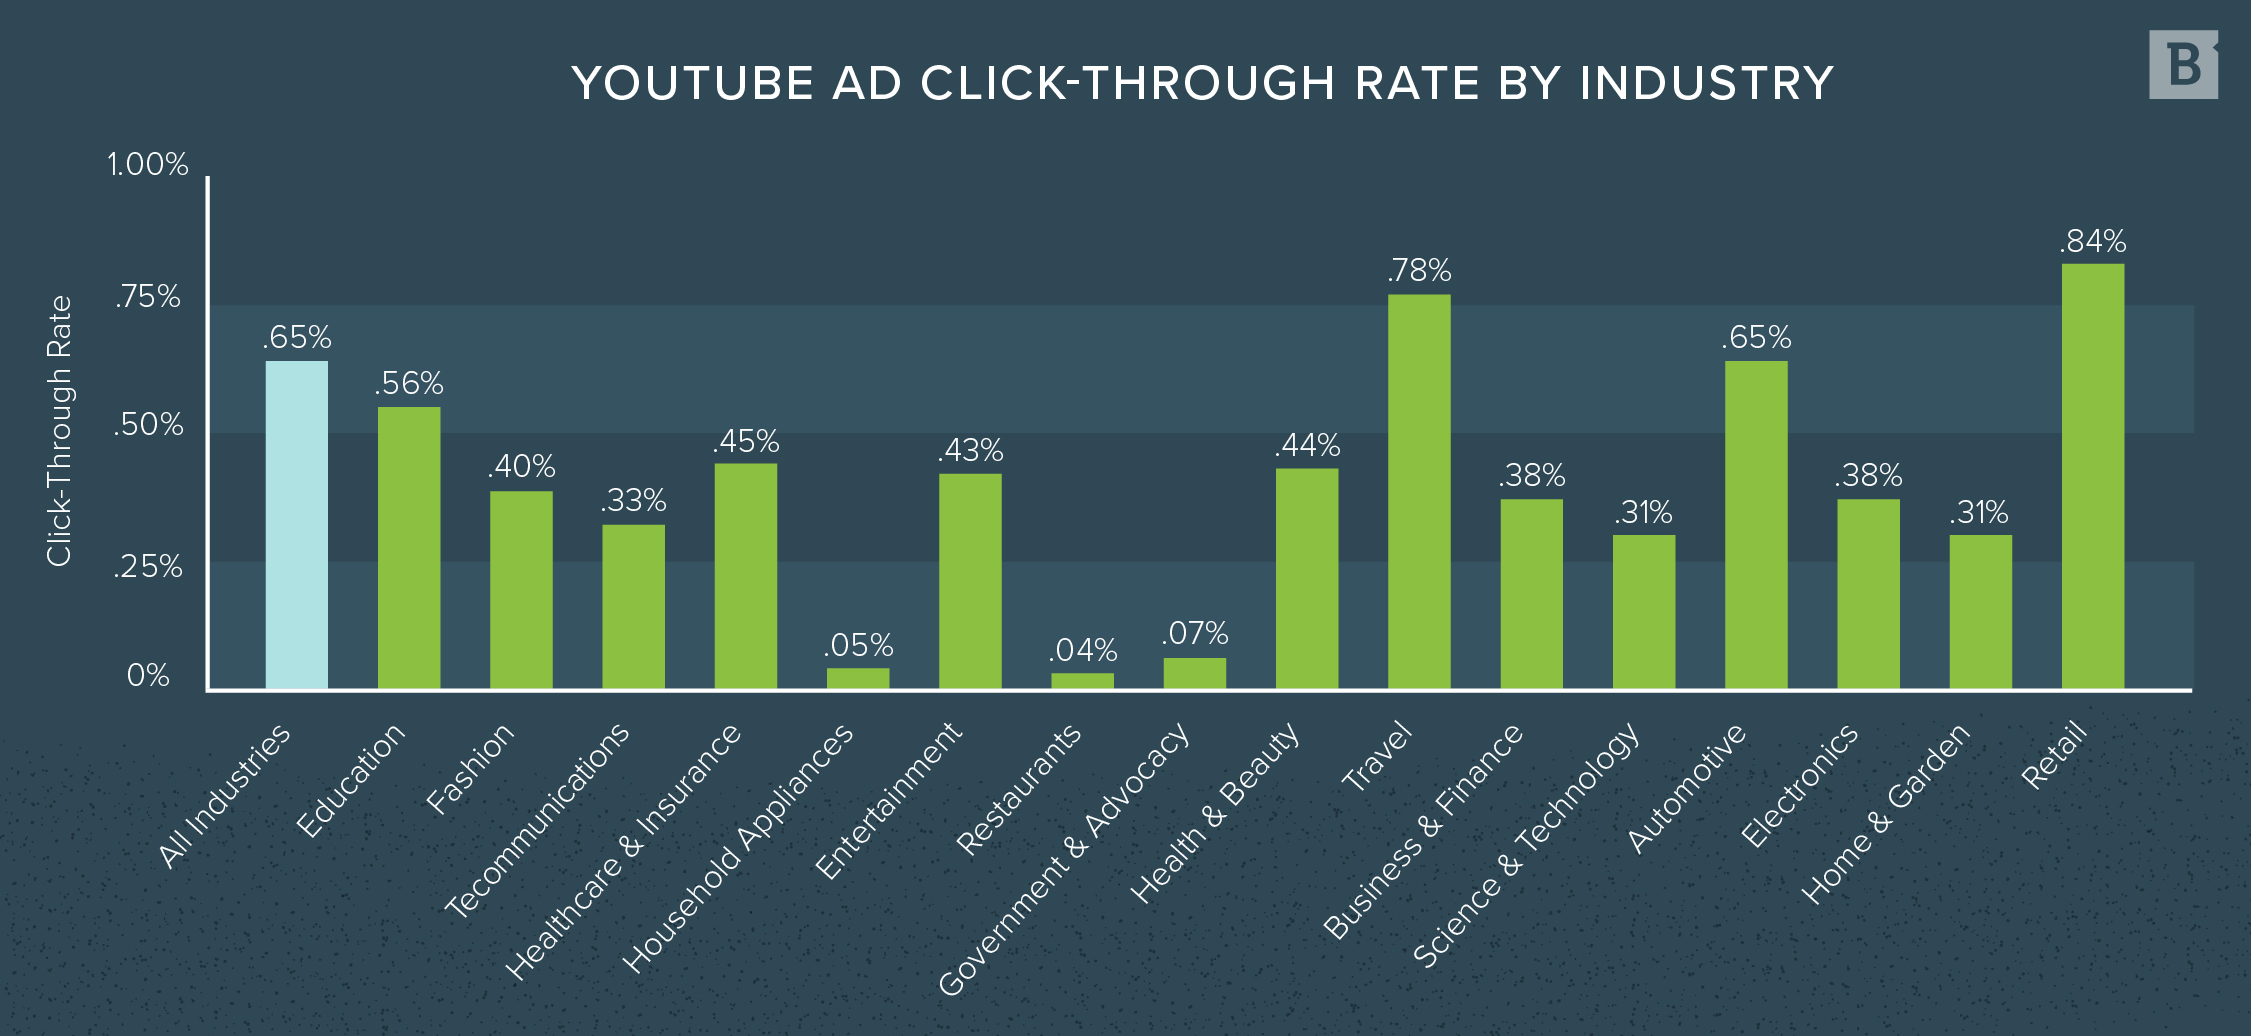 YouTube ad click through rate by industry